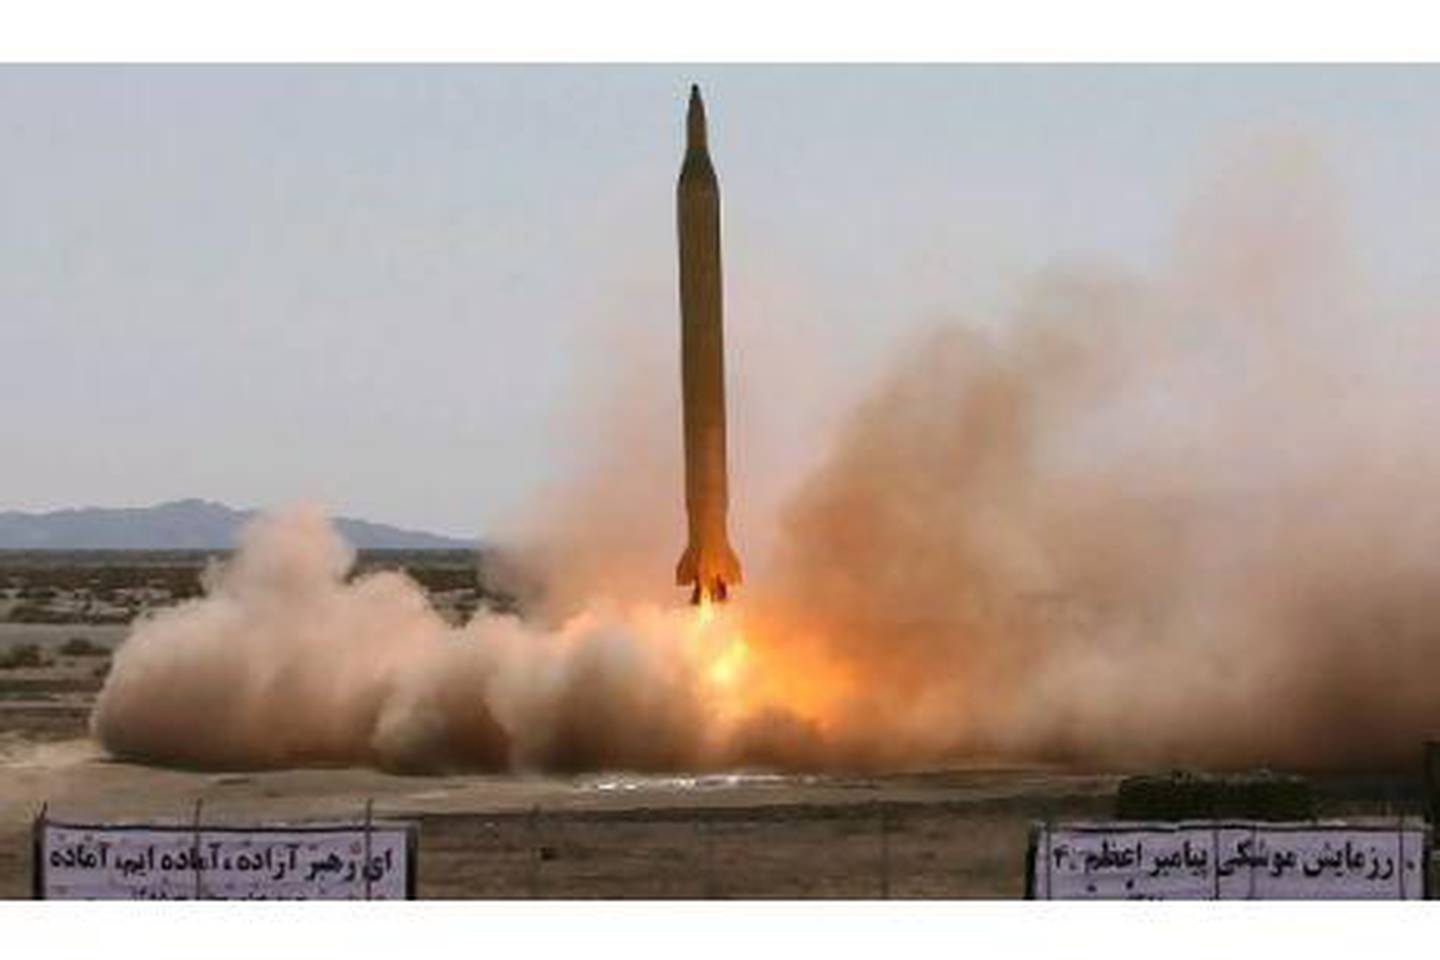 A long-range Shahab 3 missile developed by Iran.